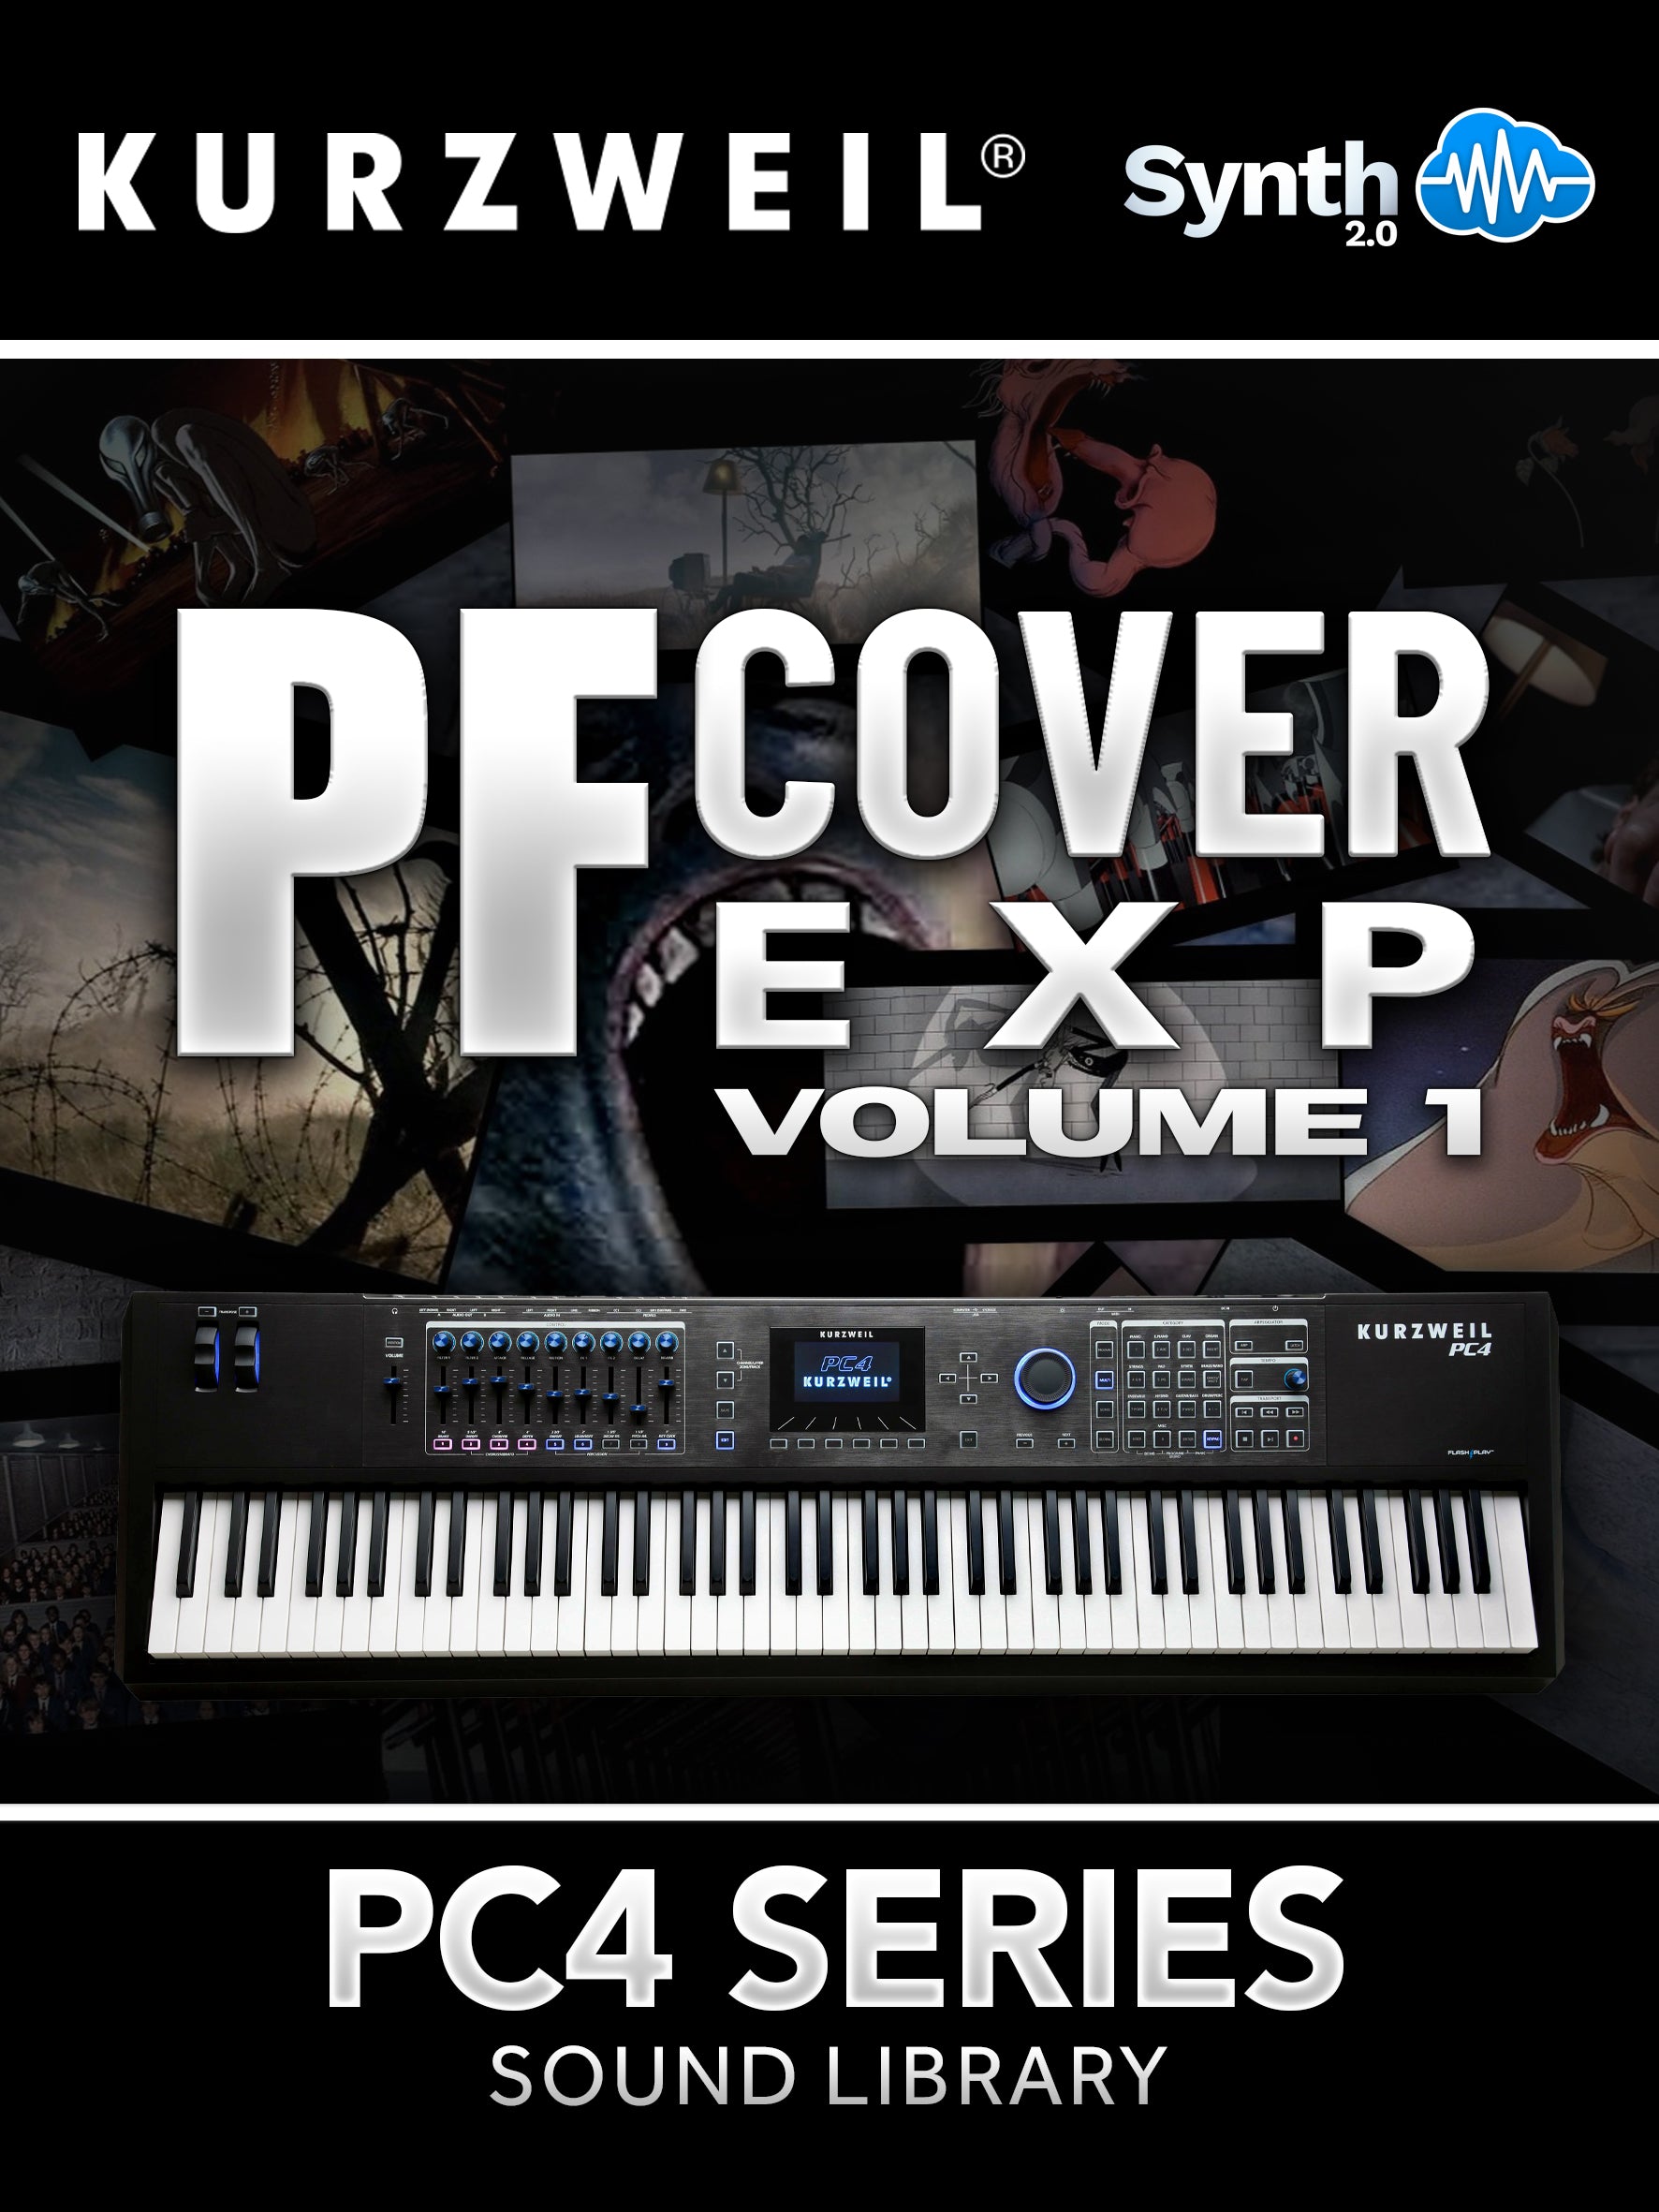 FPL004 - PF Cover EXP - Kurzweil PC4 Series ( 109 presets )